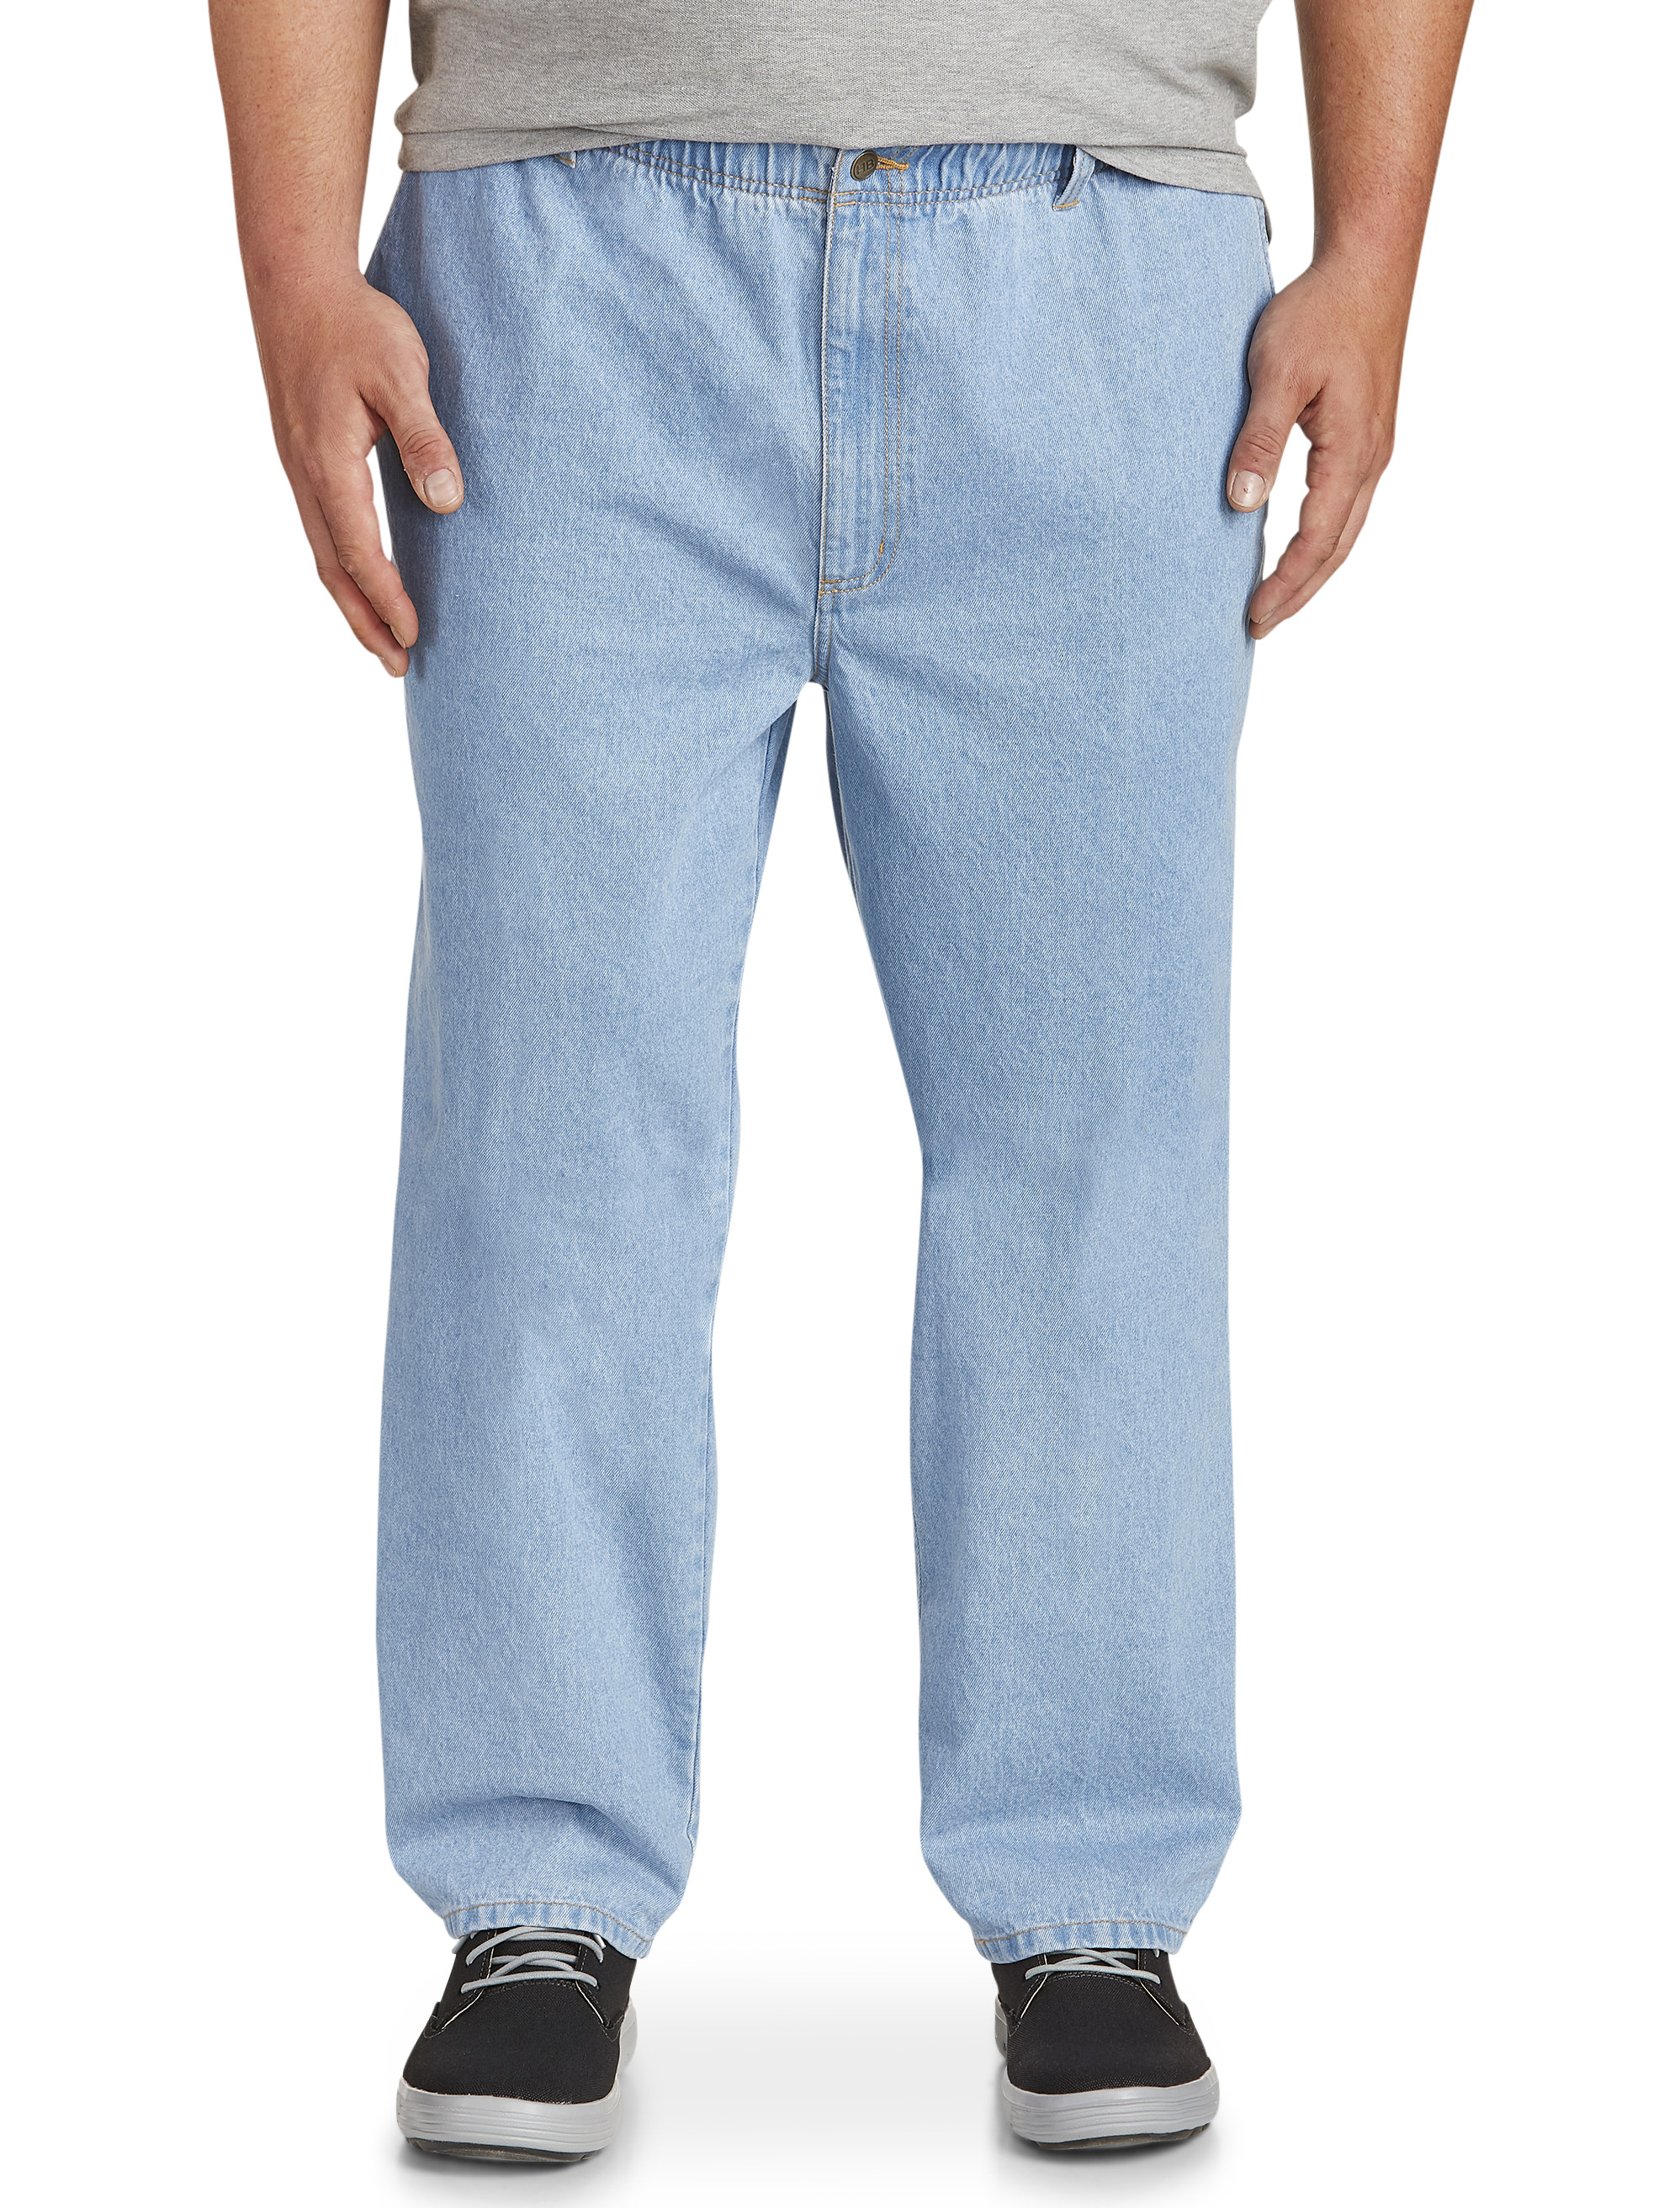 Big + Tall, Harbor Bay Tapered-Fit Full Elastic Jeans